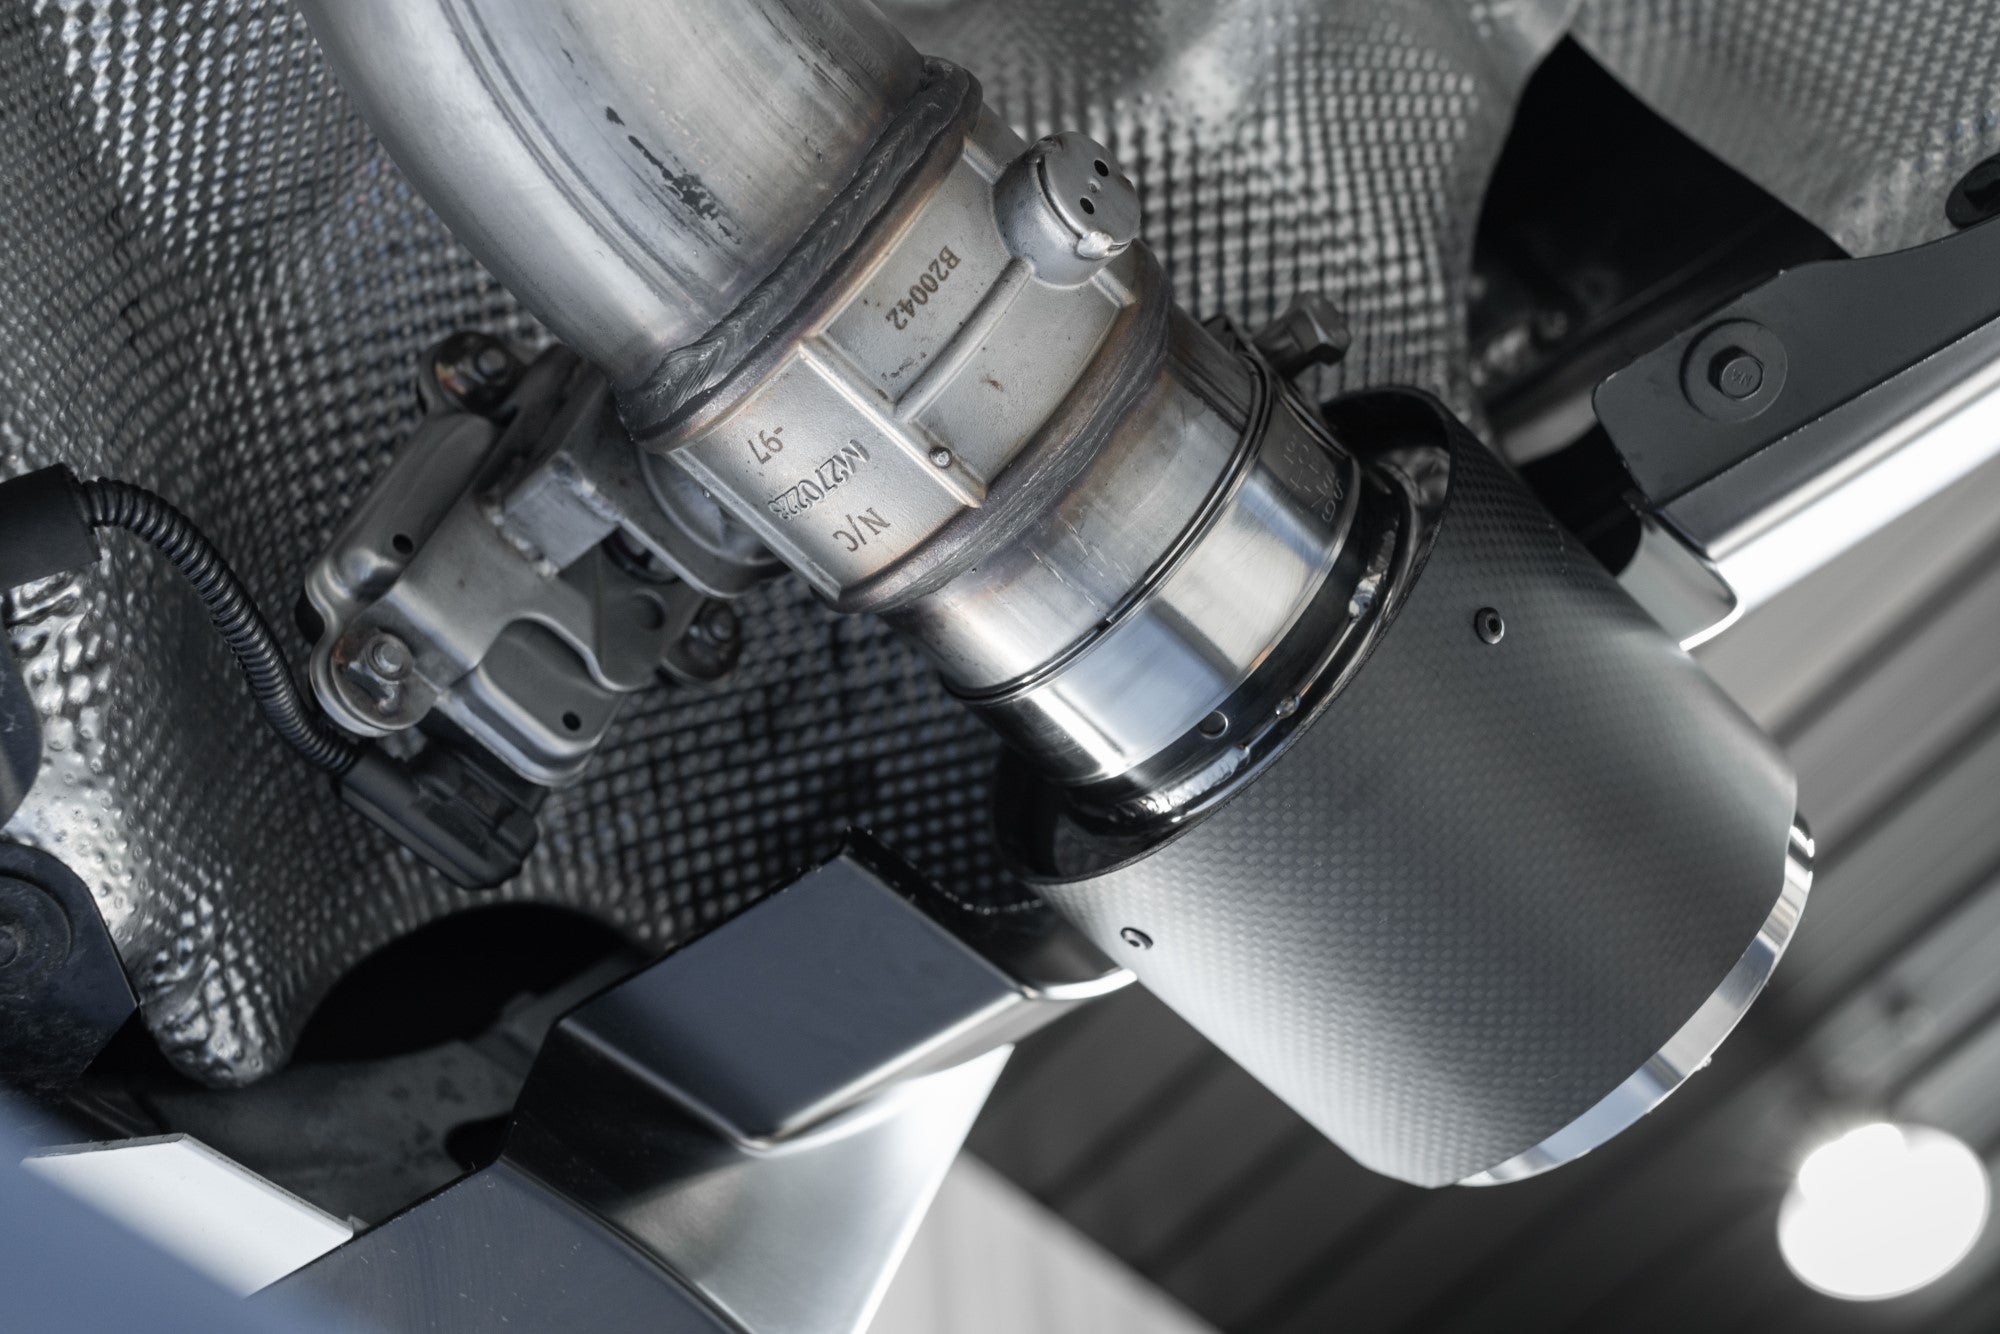 MBRP Active Profile Exhaust - Toyota A90 Supra